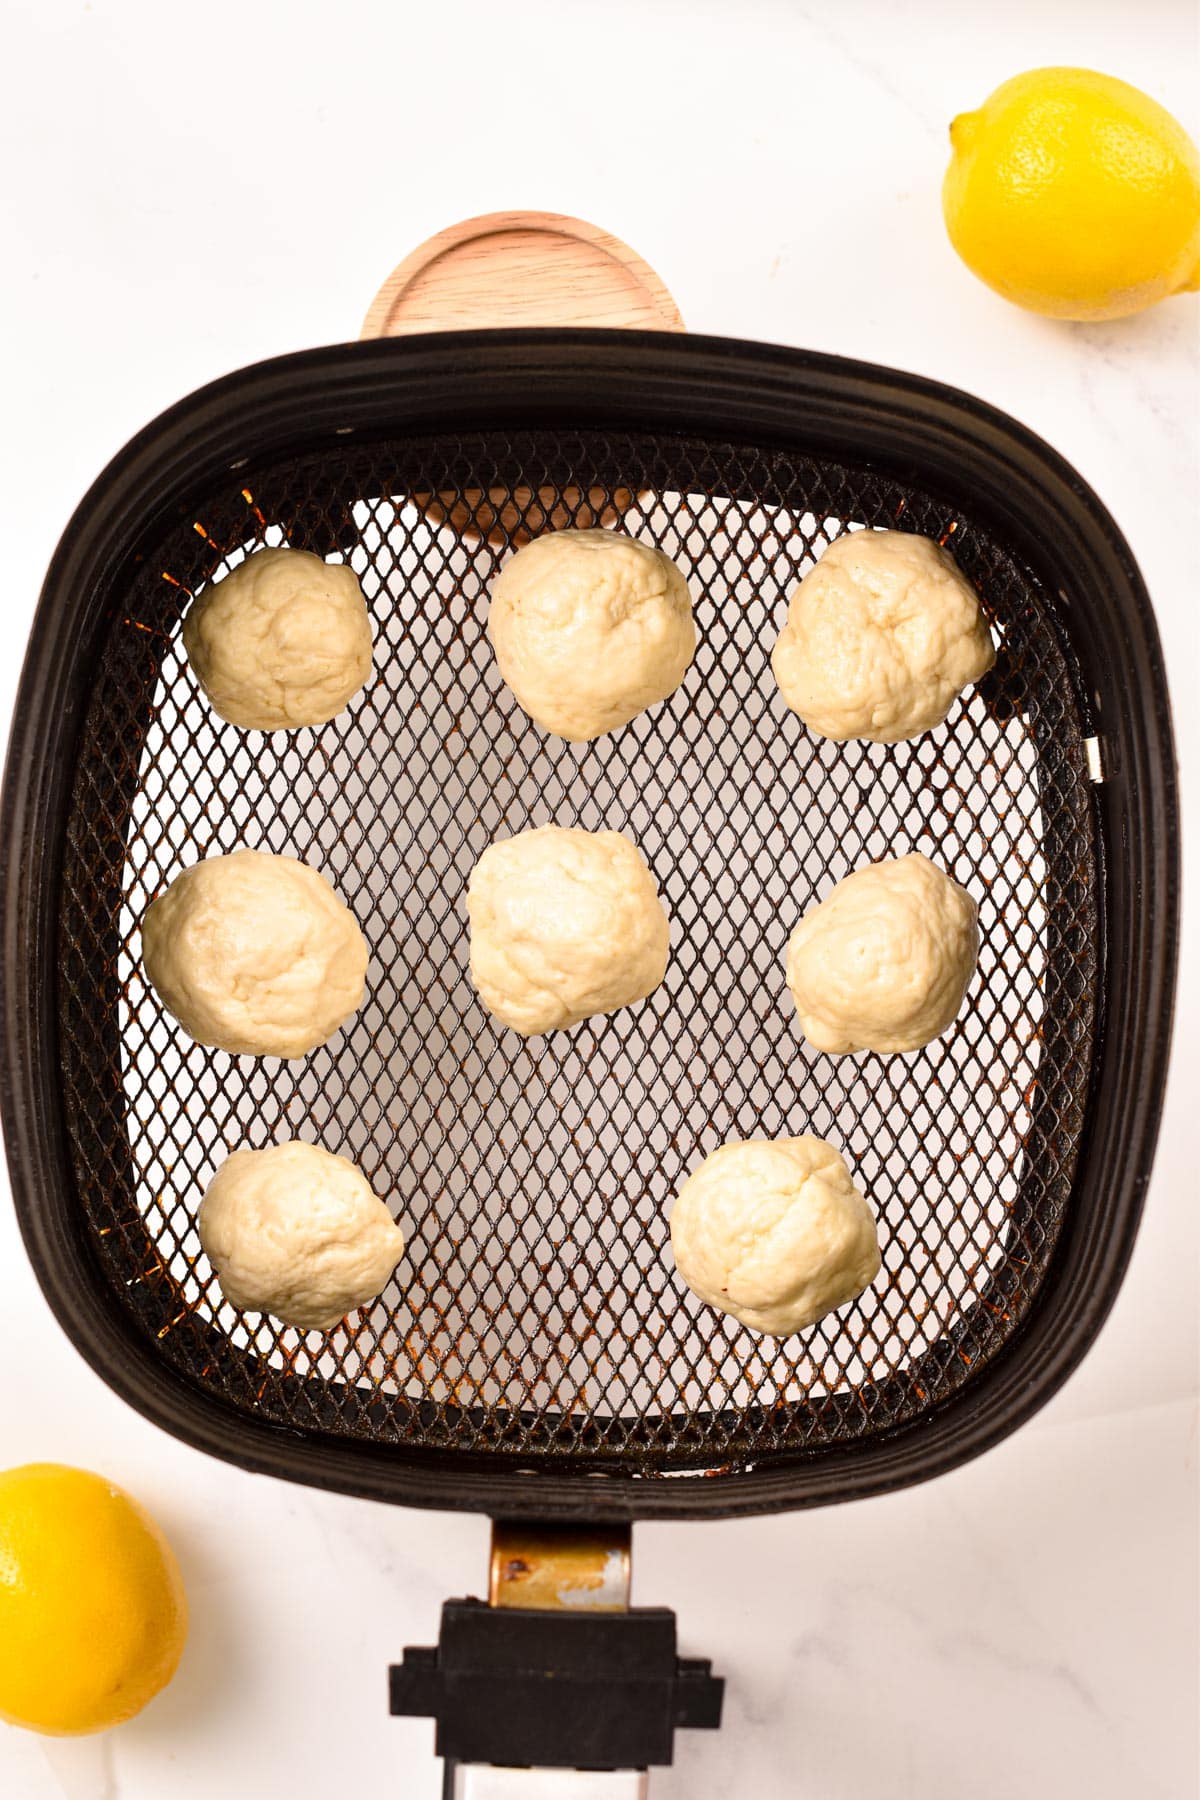 8 donut hole balls in the air fryer basket